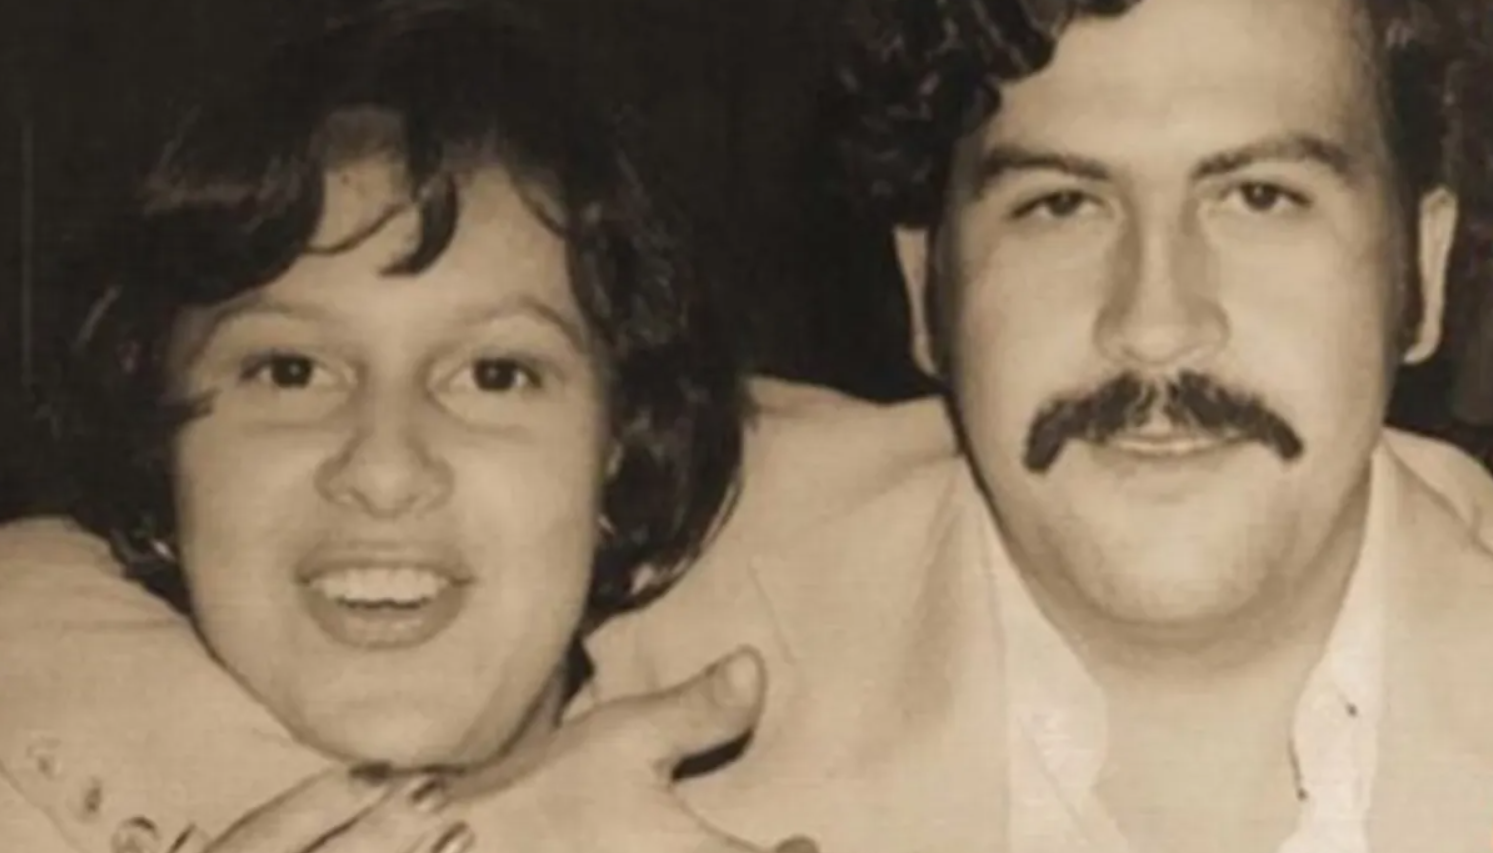 Pablo Escobar's Medellin Cartel: Ruthless, Wild And Deadly